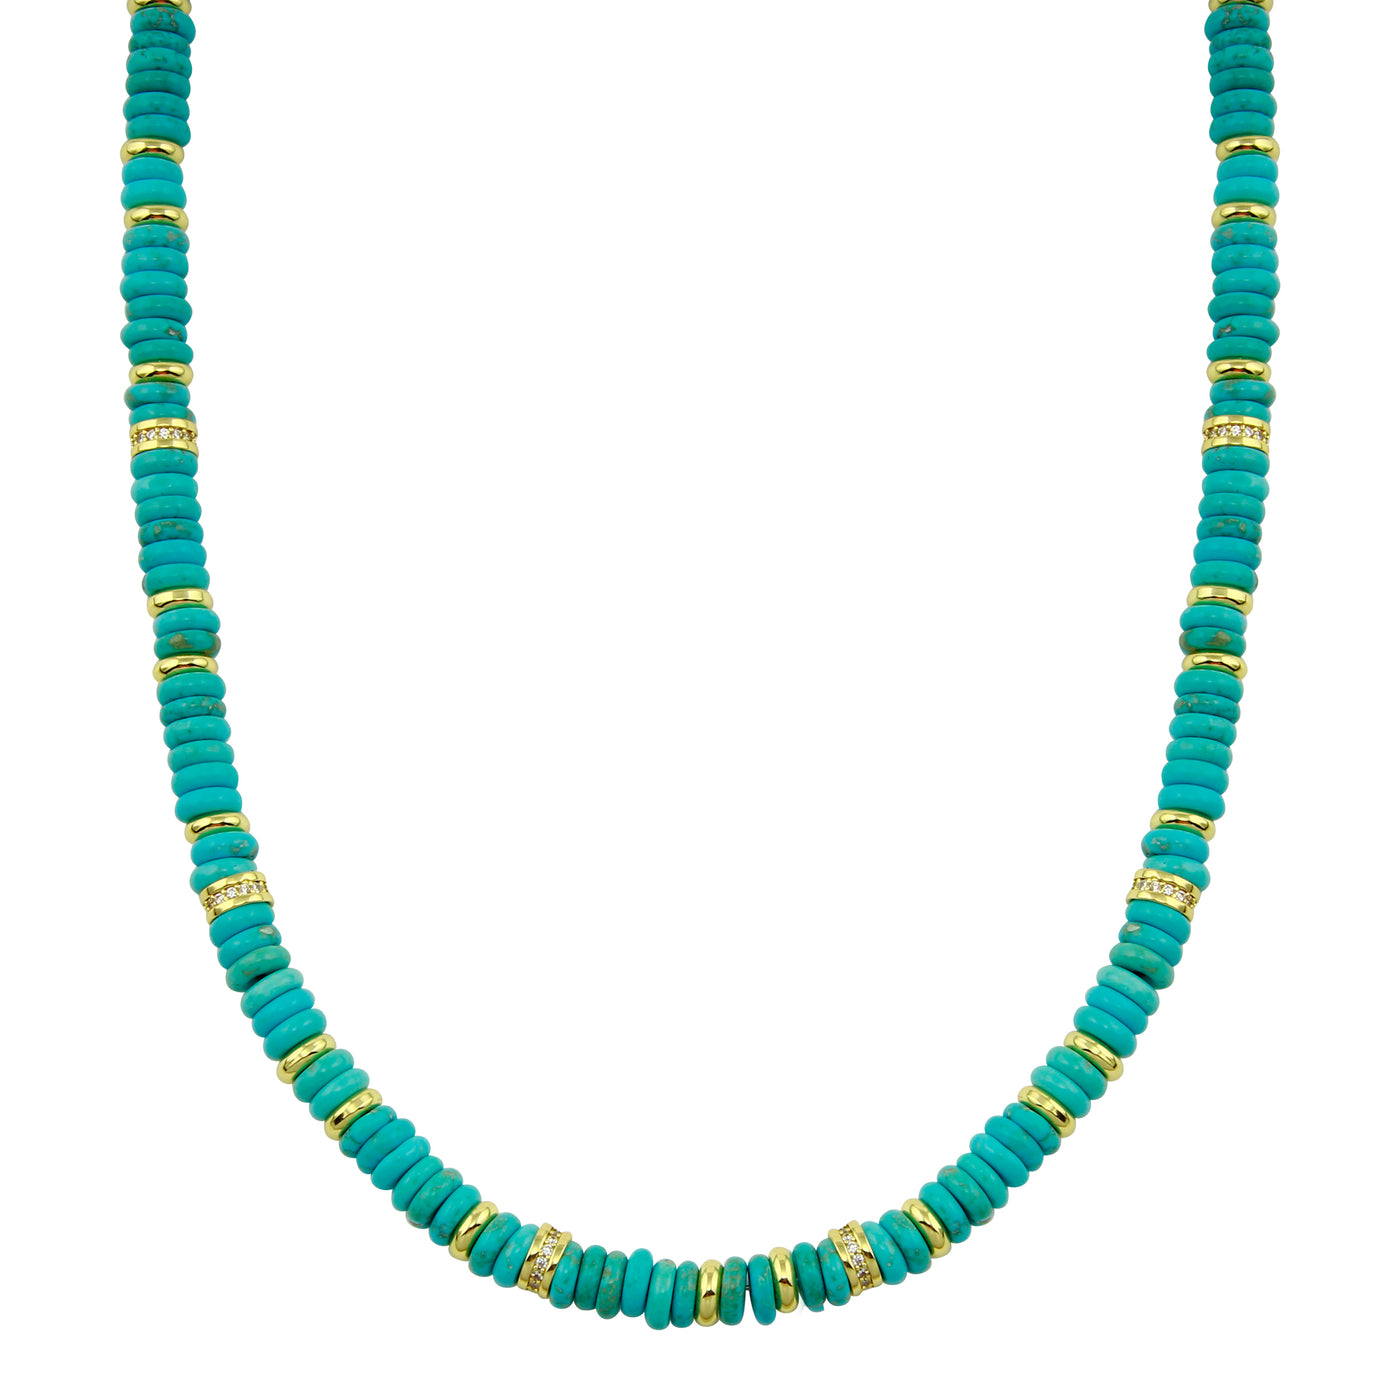 Color Pukka Gold Necklace